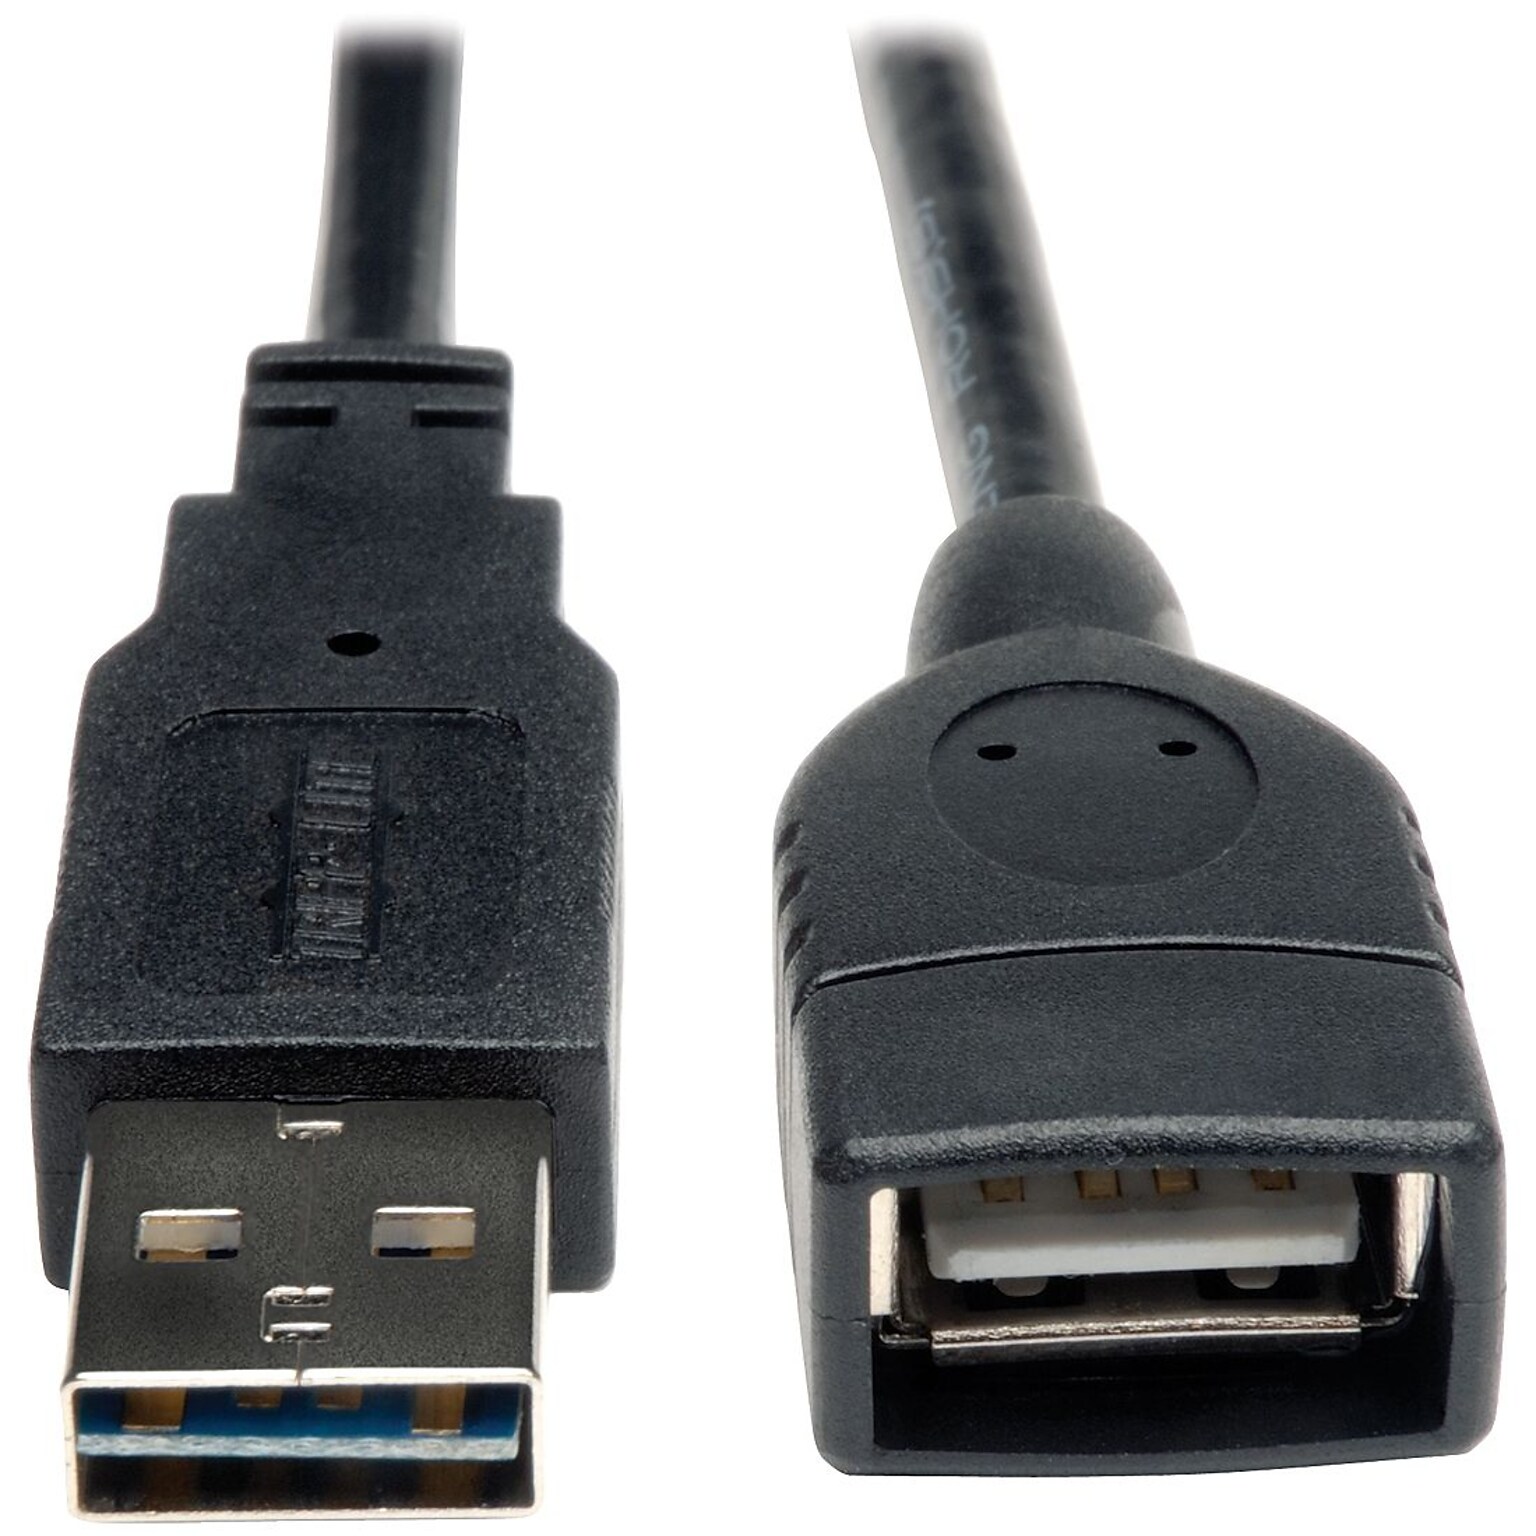 Tripp Lite 10 Universal Reversible USB 2.0 A Male to A Female Extension Cable; Black